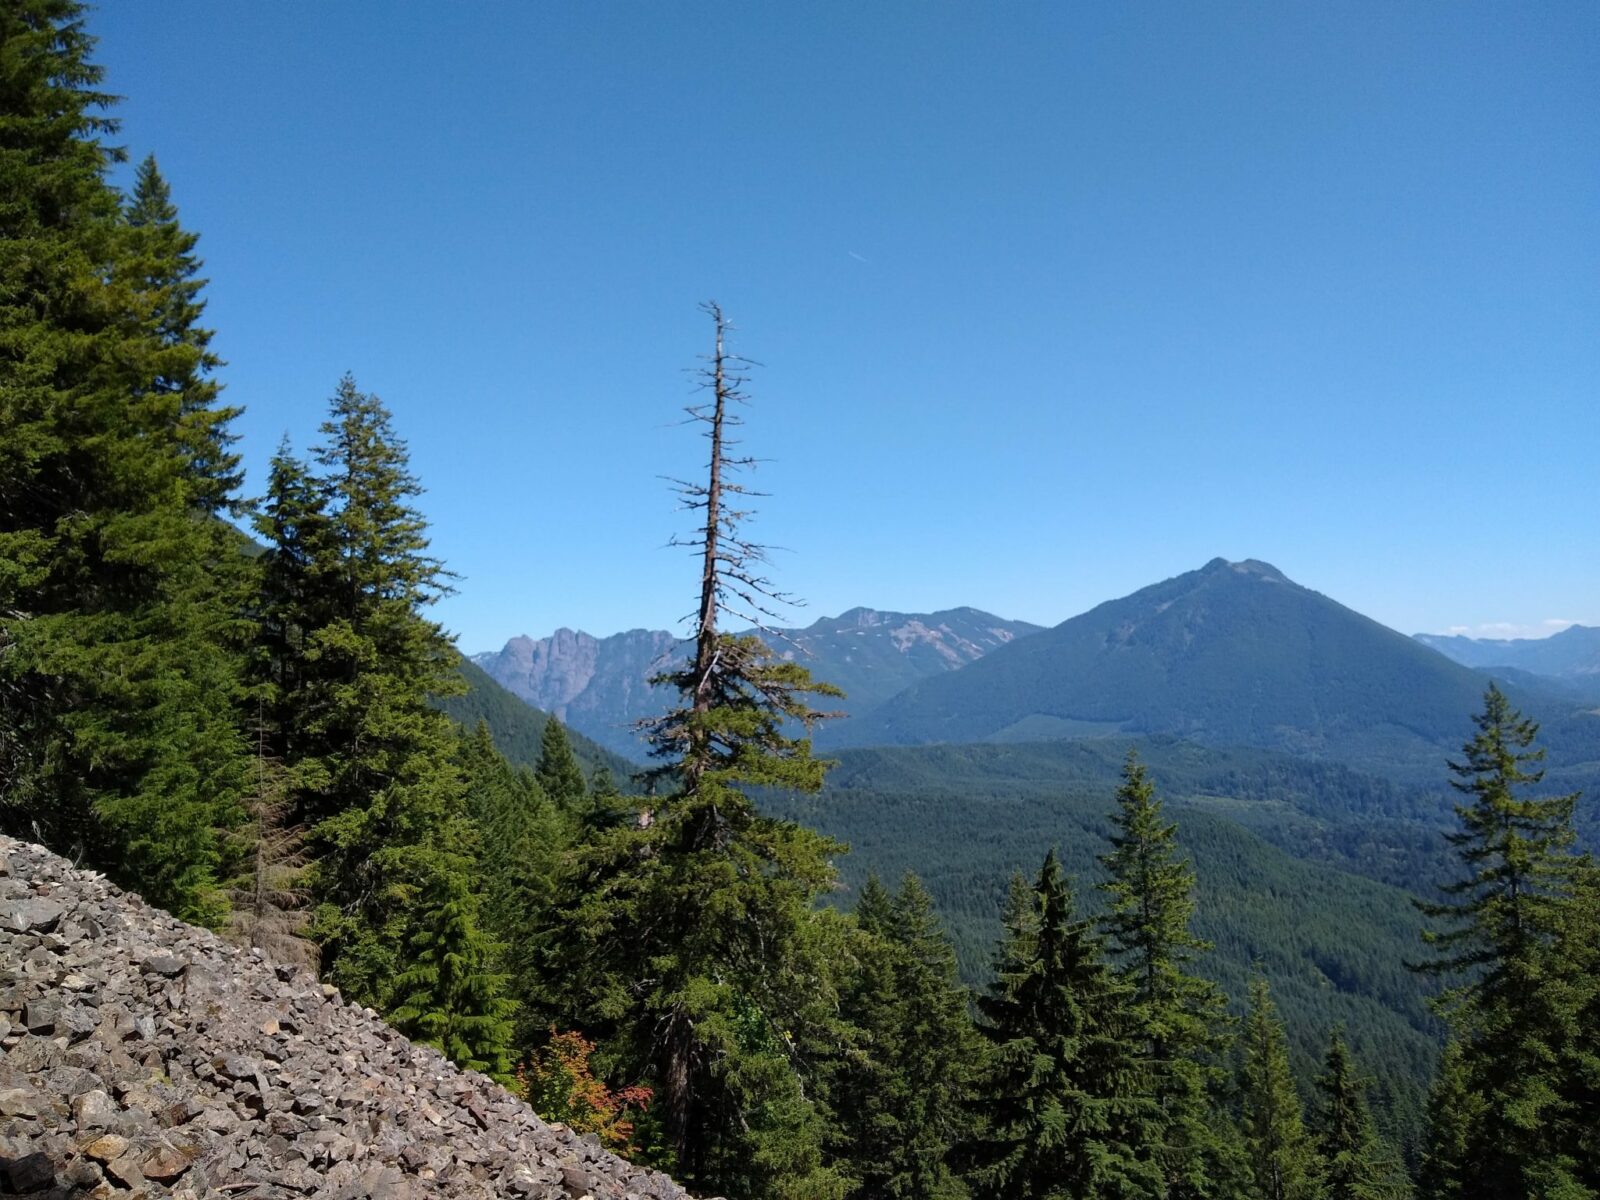 On the talus loop hike, the trail crosses a rock field. The rock field is in the foreground and evergreen trees in the background. in the distance are forested hills and higher mountains